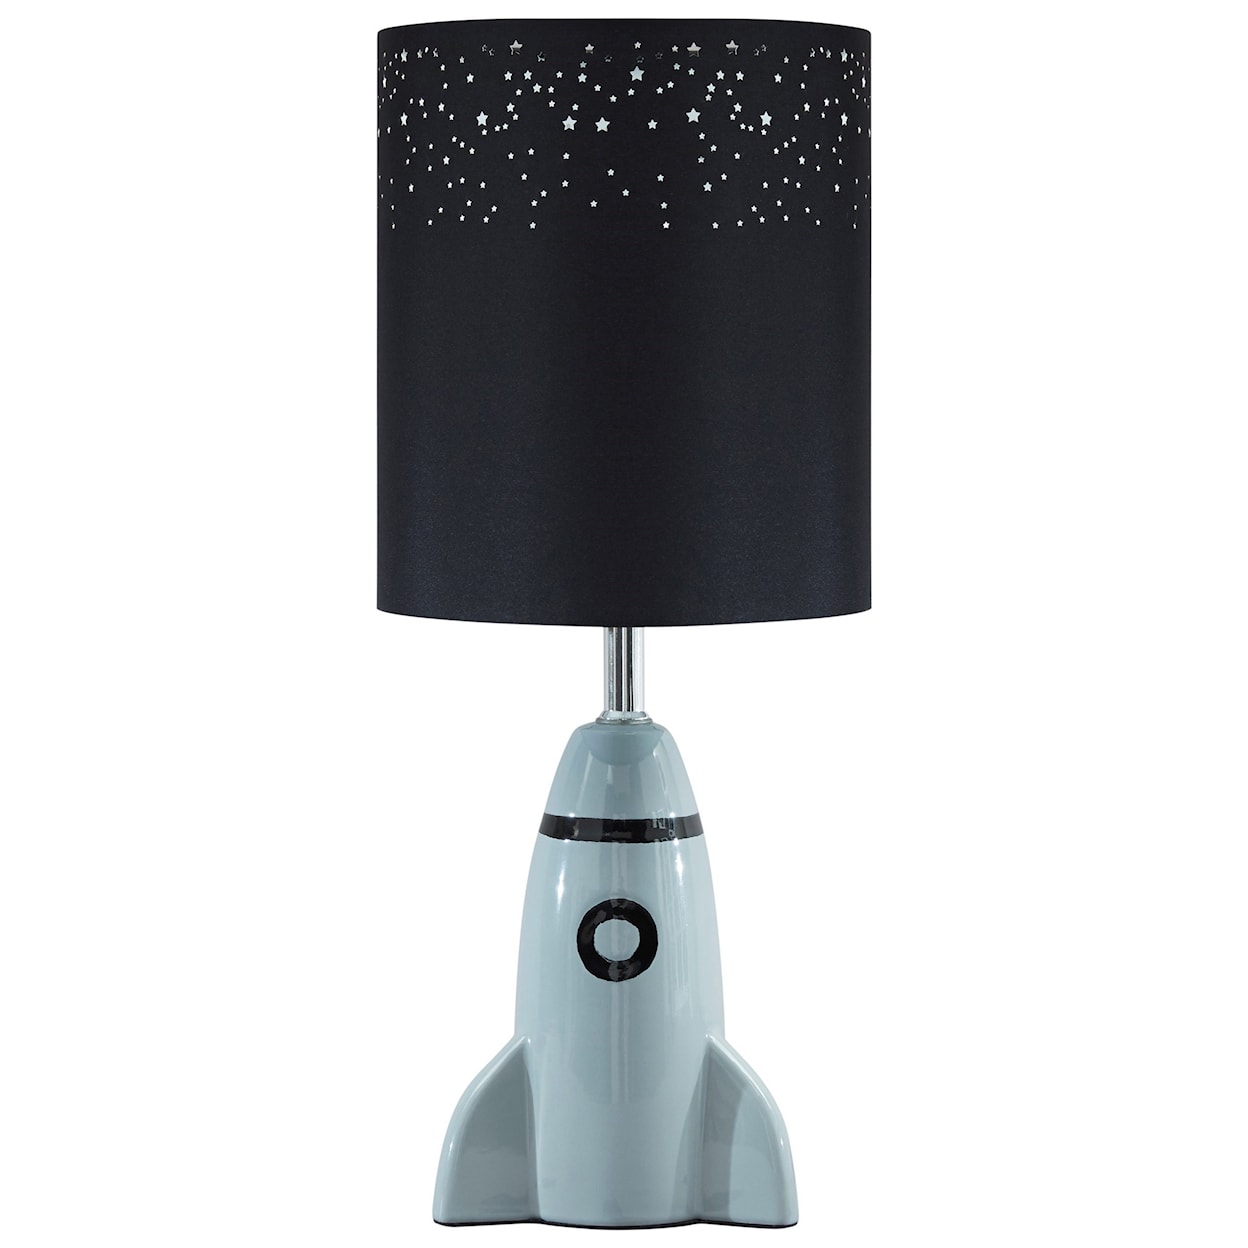 Signature Design by Ashley Lamps - Youth Cale Gray/Black Ceramic Table Lamp